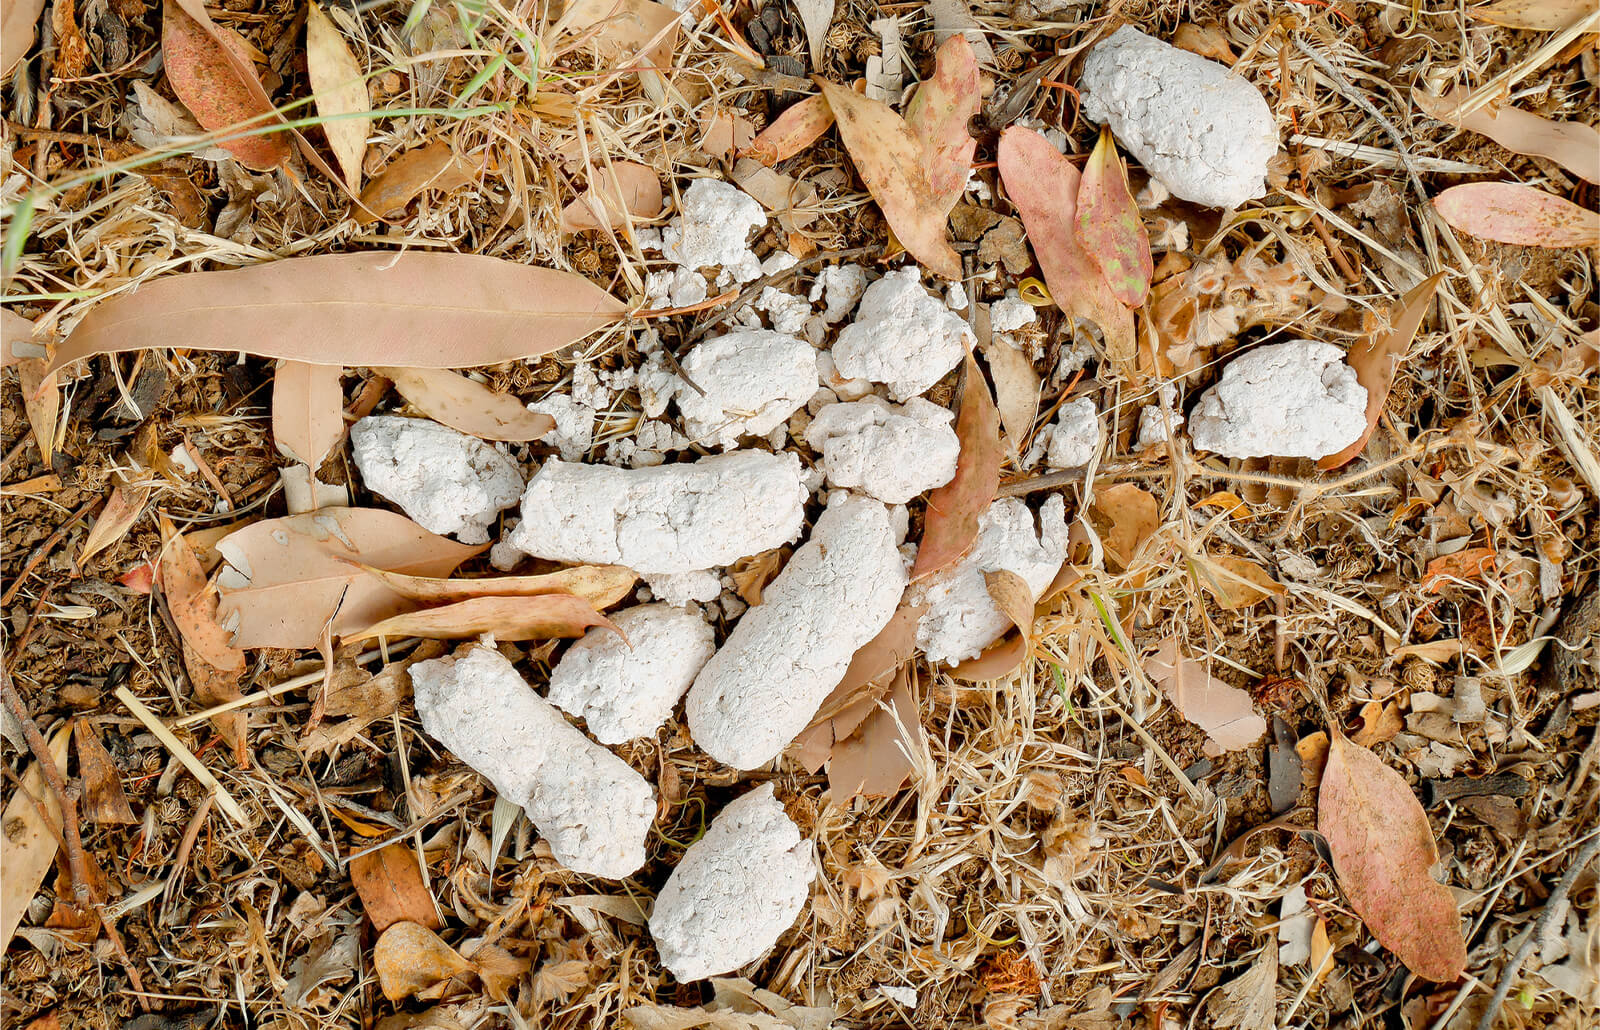 Things that disappeared without a trace - white dog poo